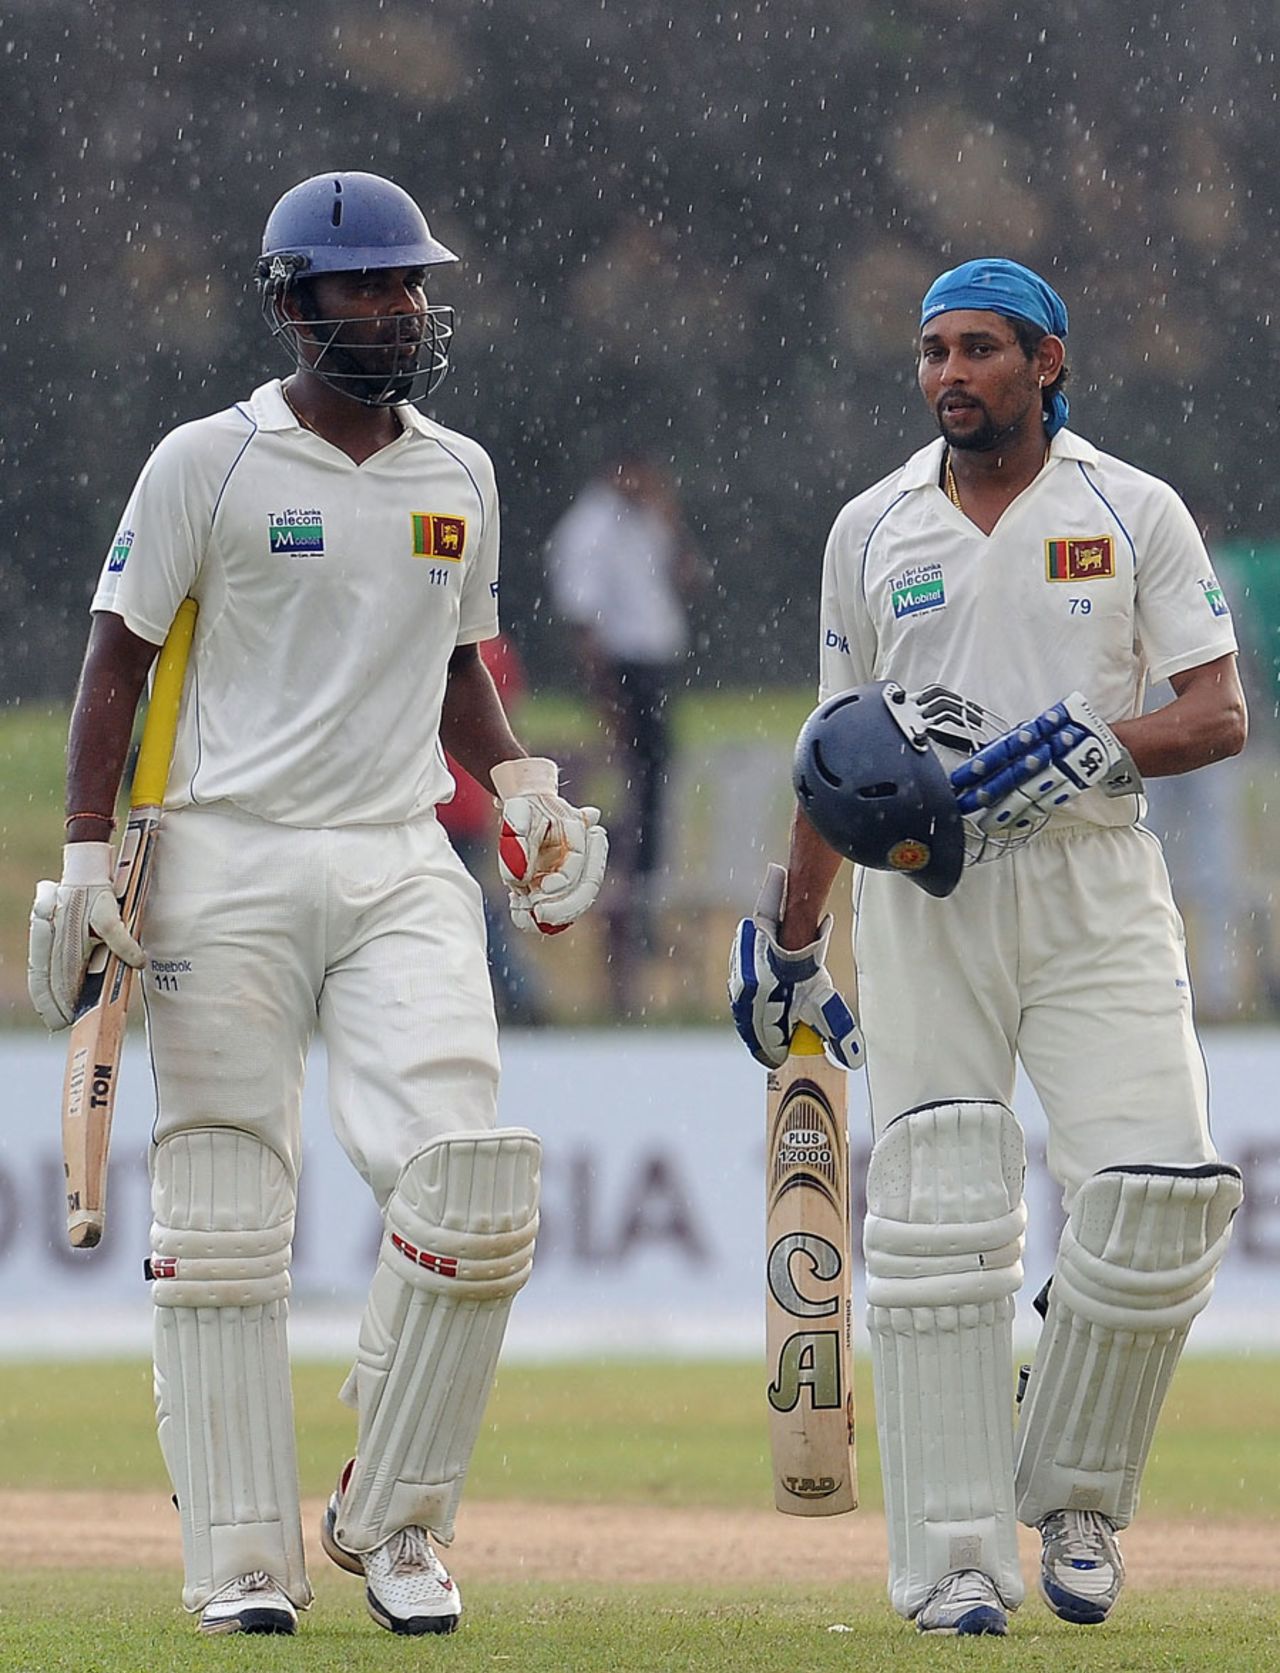 Tillakaratne Dilshan and Tharanga Paranavitana added 89 for the first wicket before rain stopped play, Sri Lanka v West Indies, 1st Test, Galle, 4th day, November 18, 2010